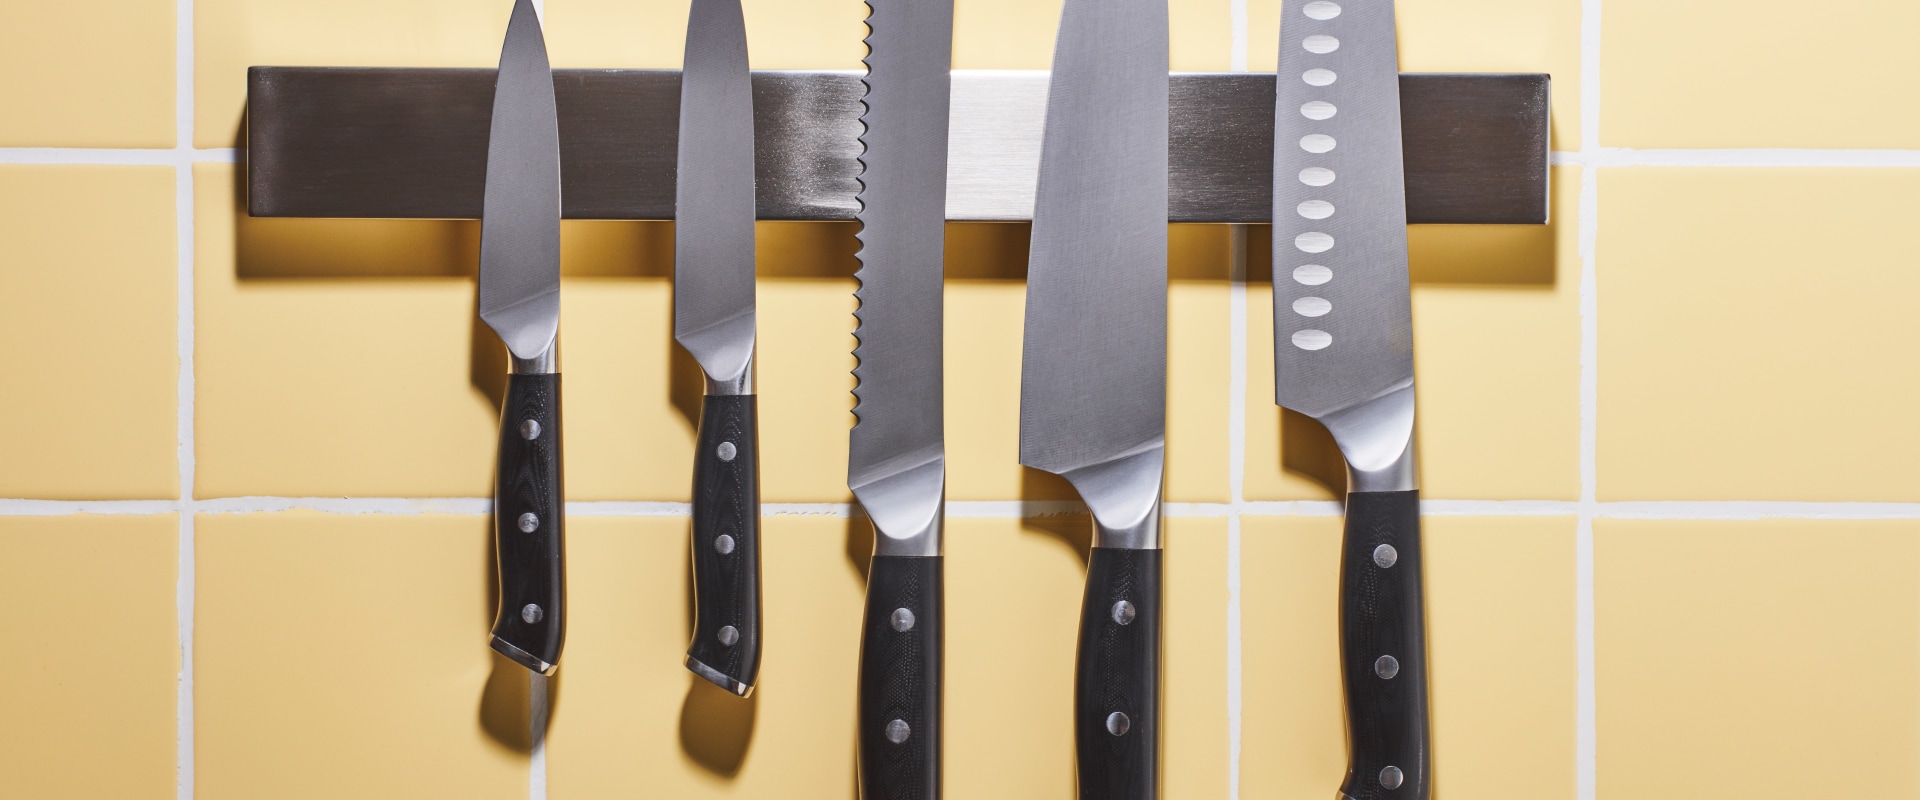 Knives or Knifes: What is the Correct Plural Form?